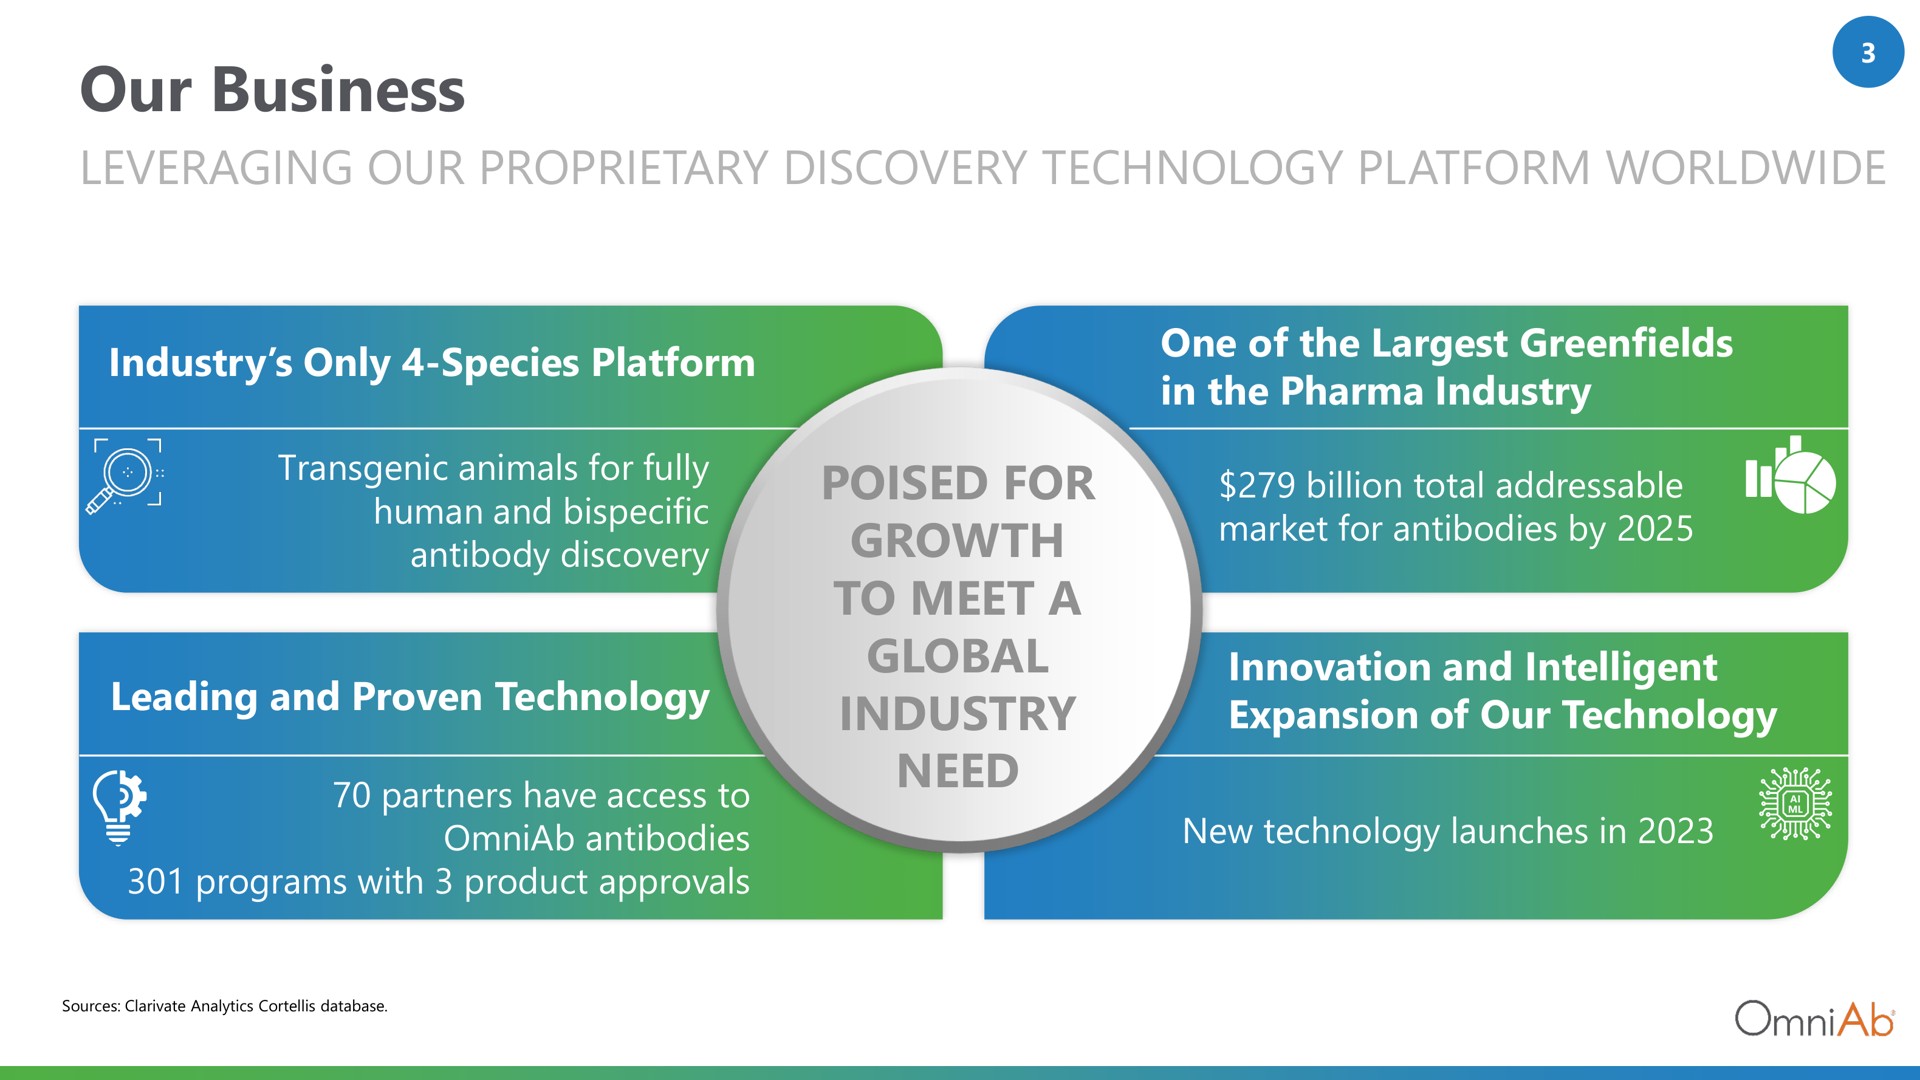 our business leveraging our proprietary discovery technology platform poised for growth to meet a global industry need | OmniAb